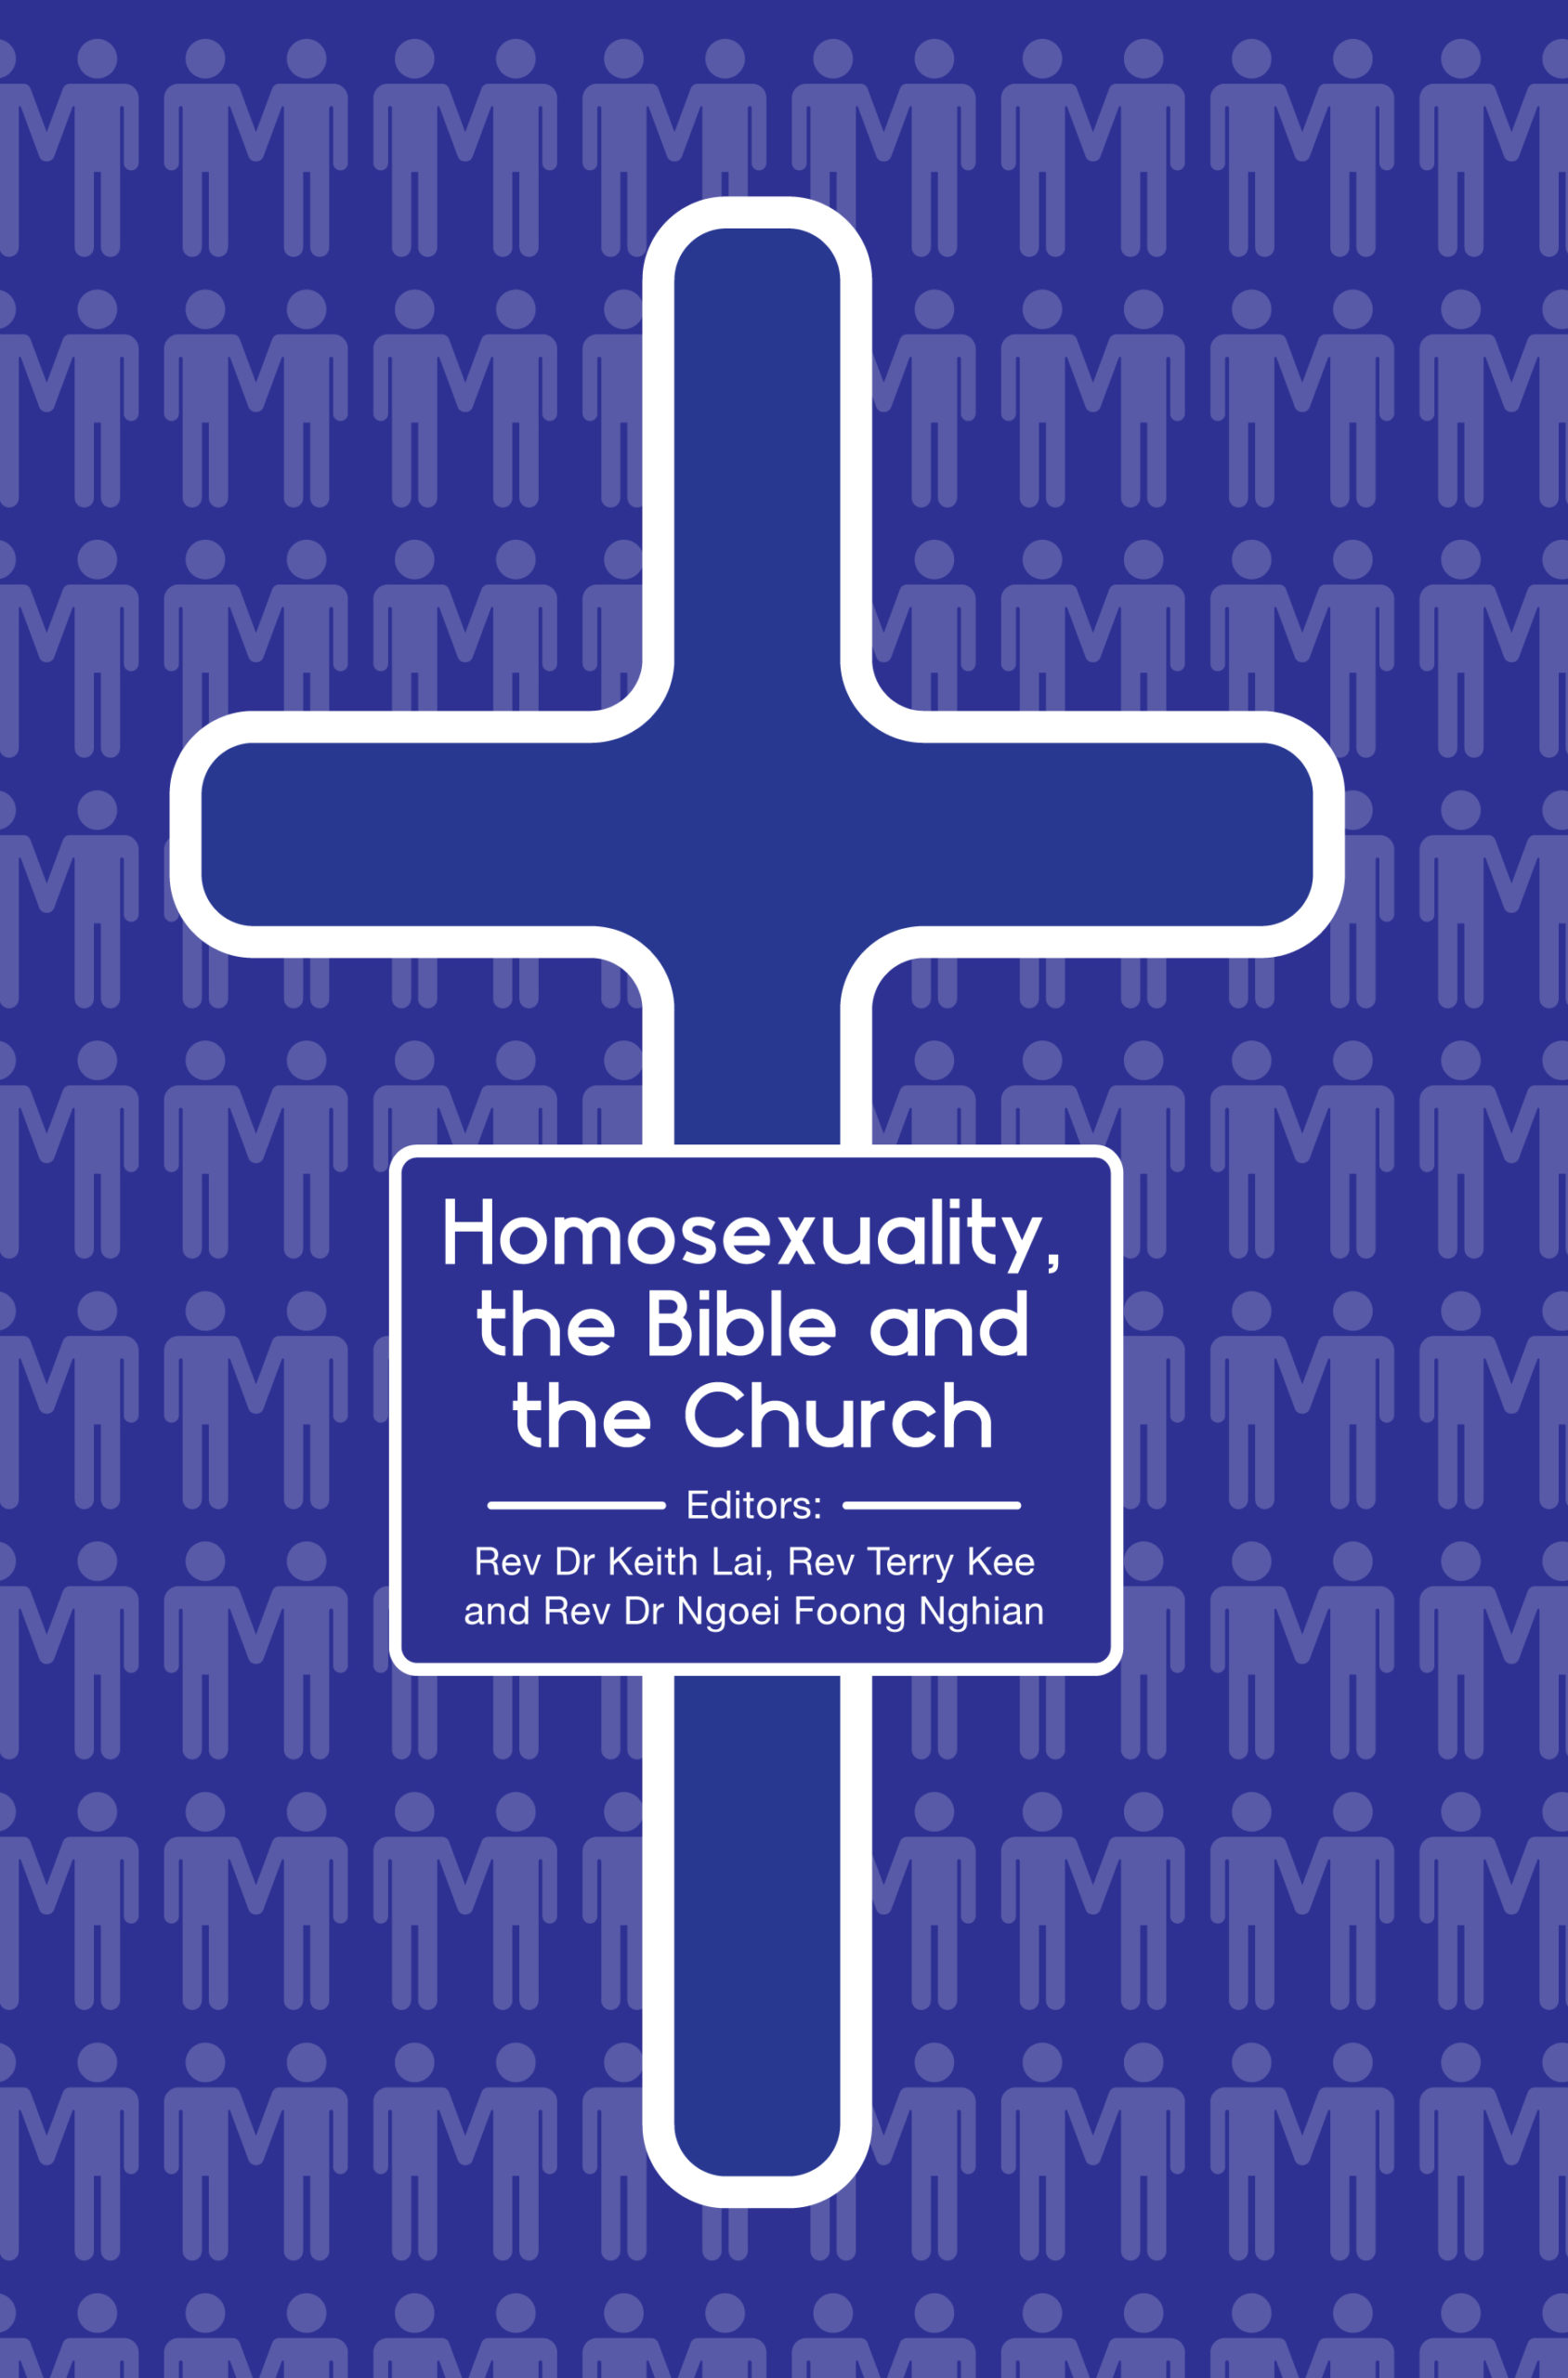 Homosexuality The Bible And The Church Bible Society Of Singapore